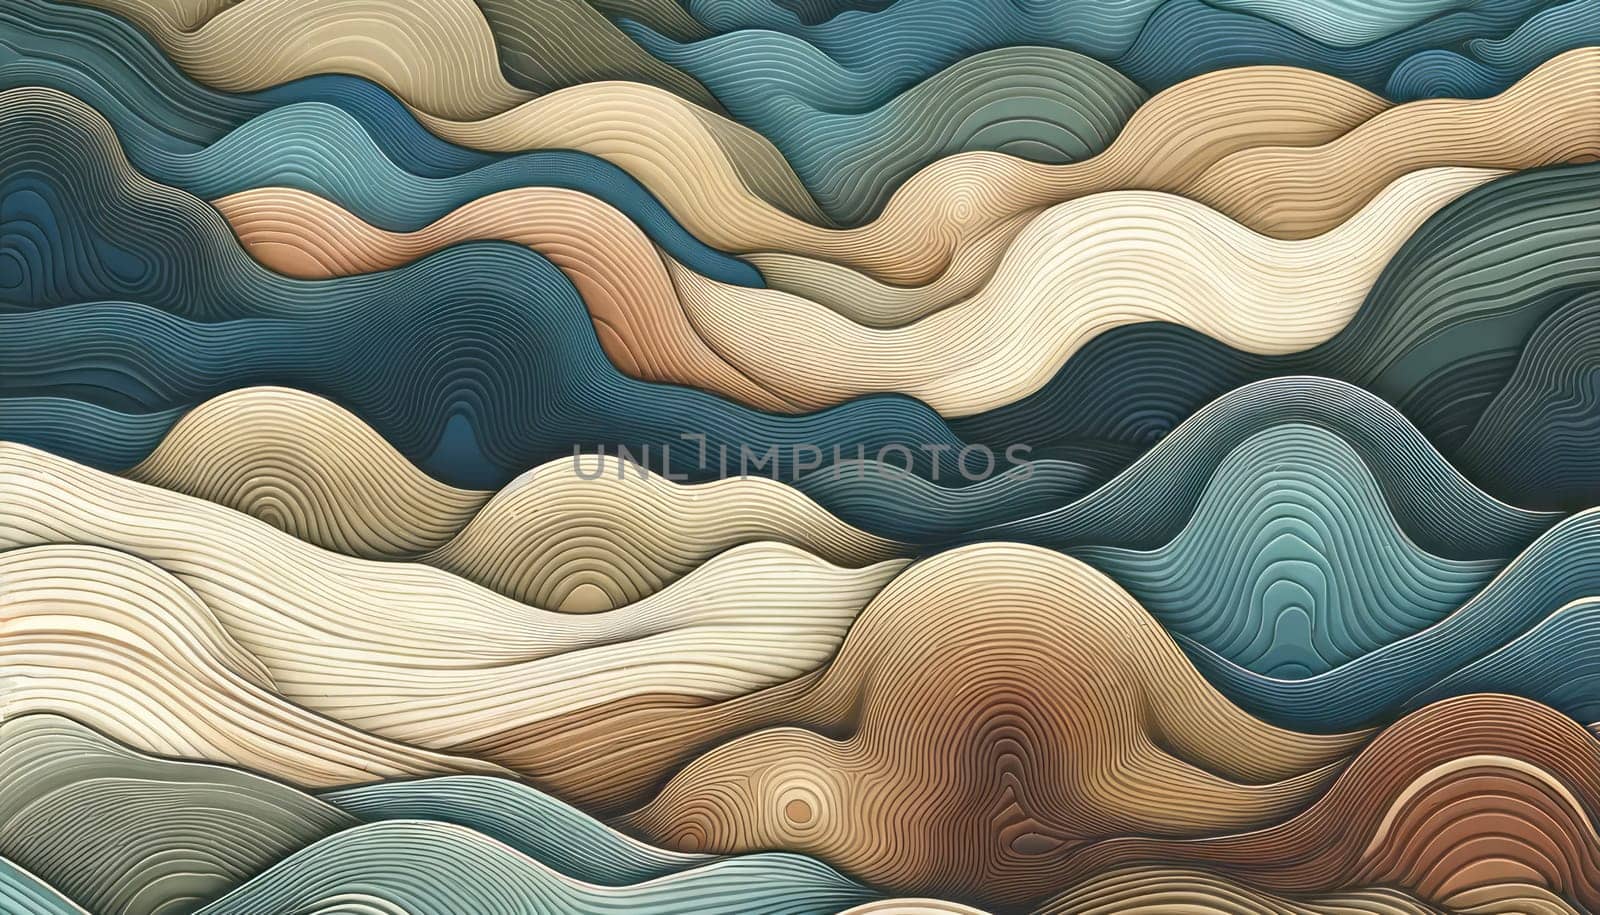 A wide digital illustration of abstract, wavy by nkotlyar